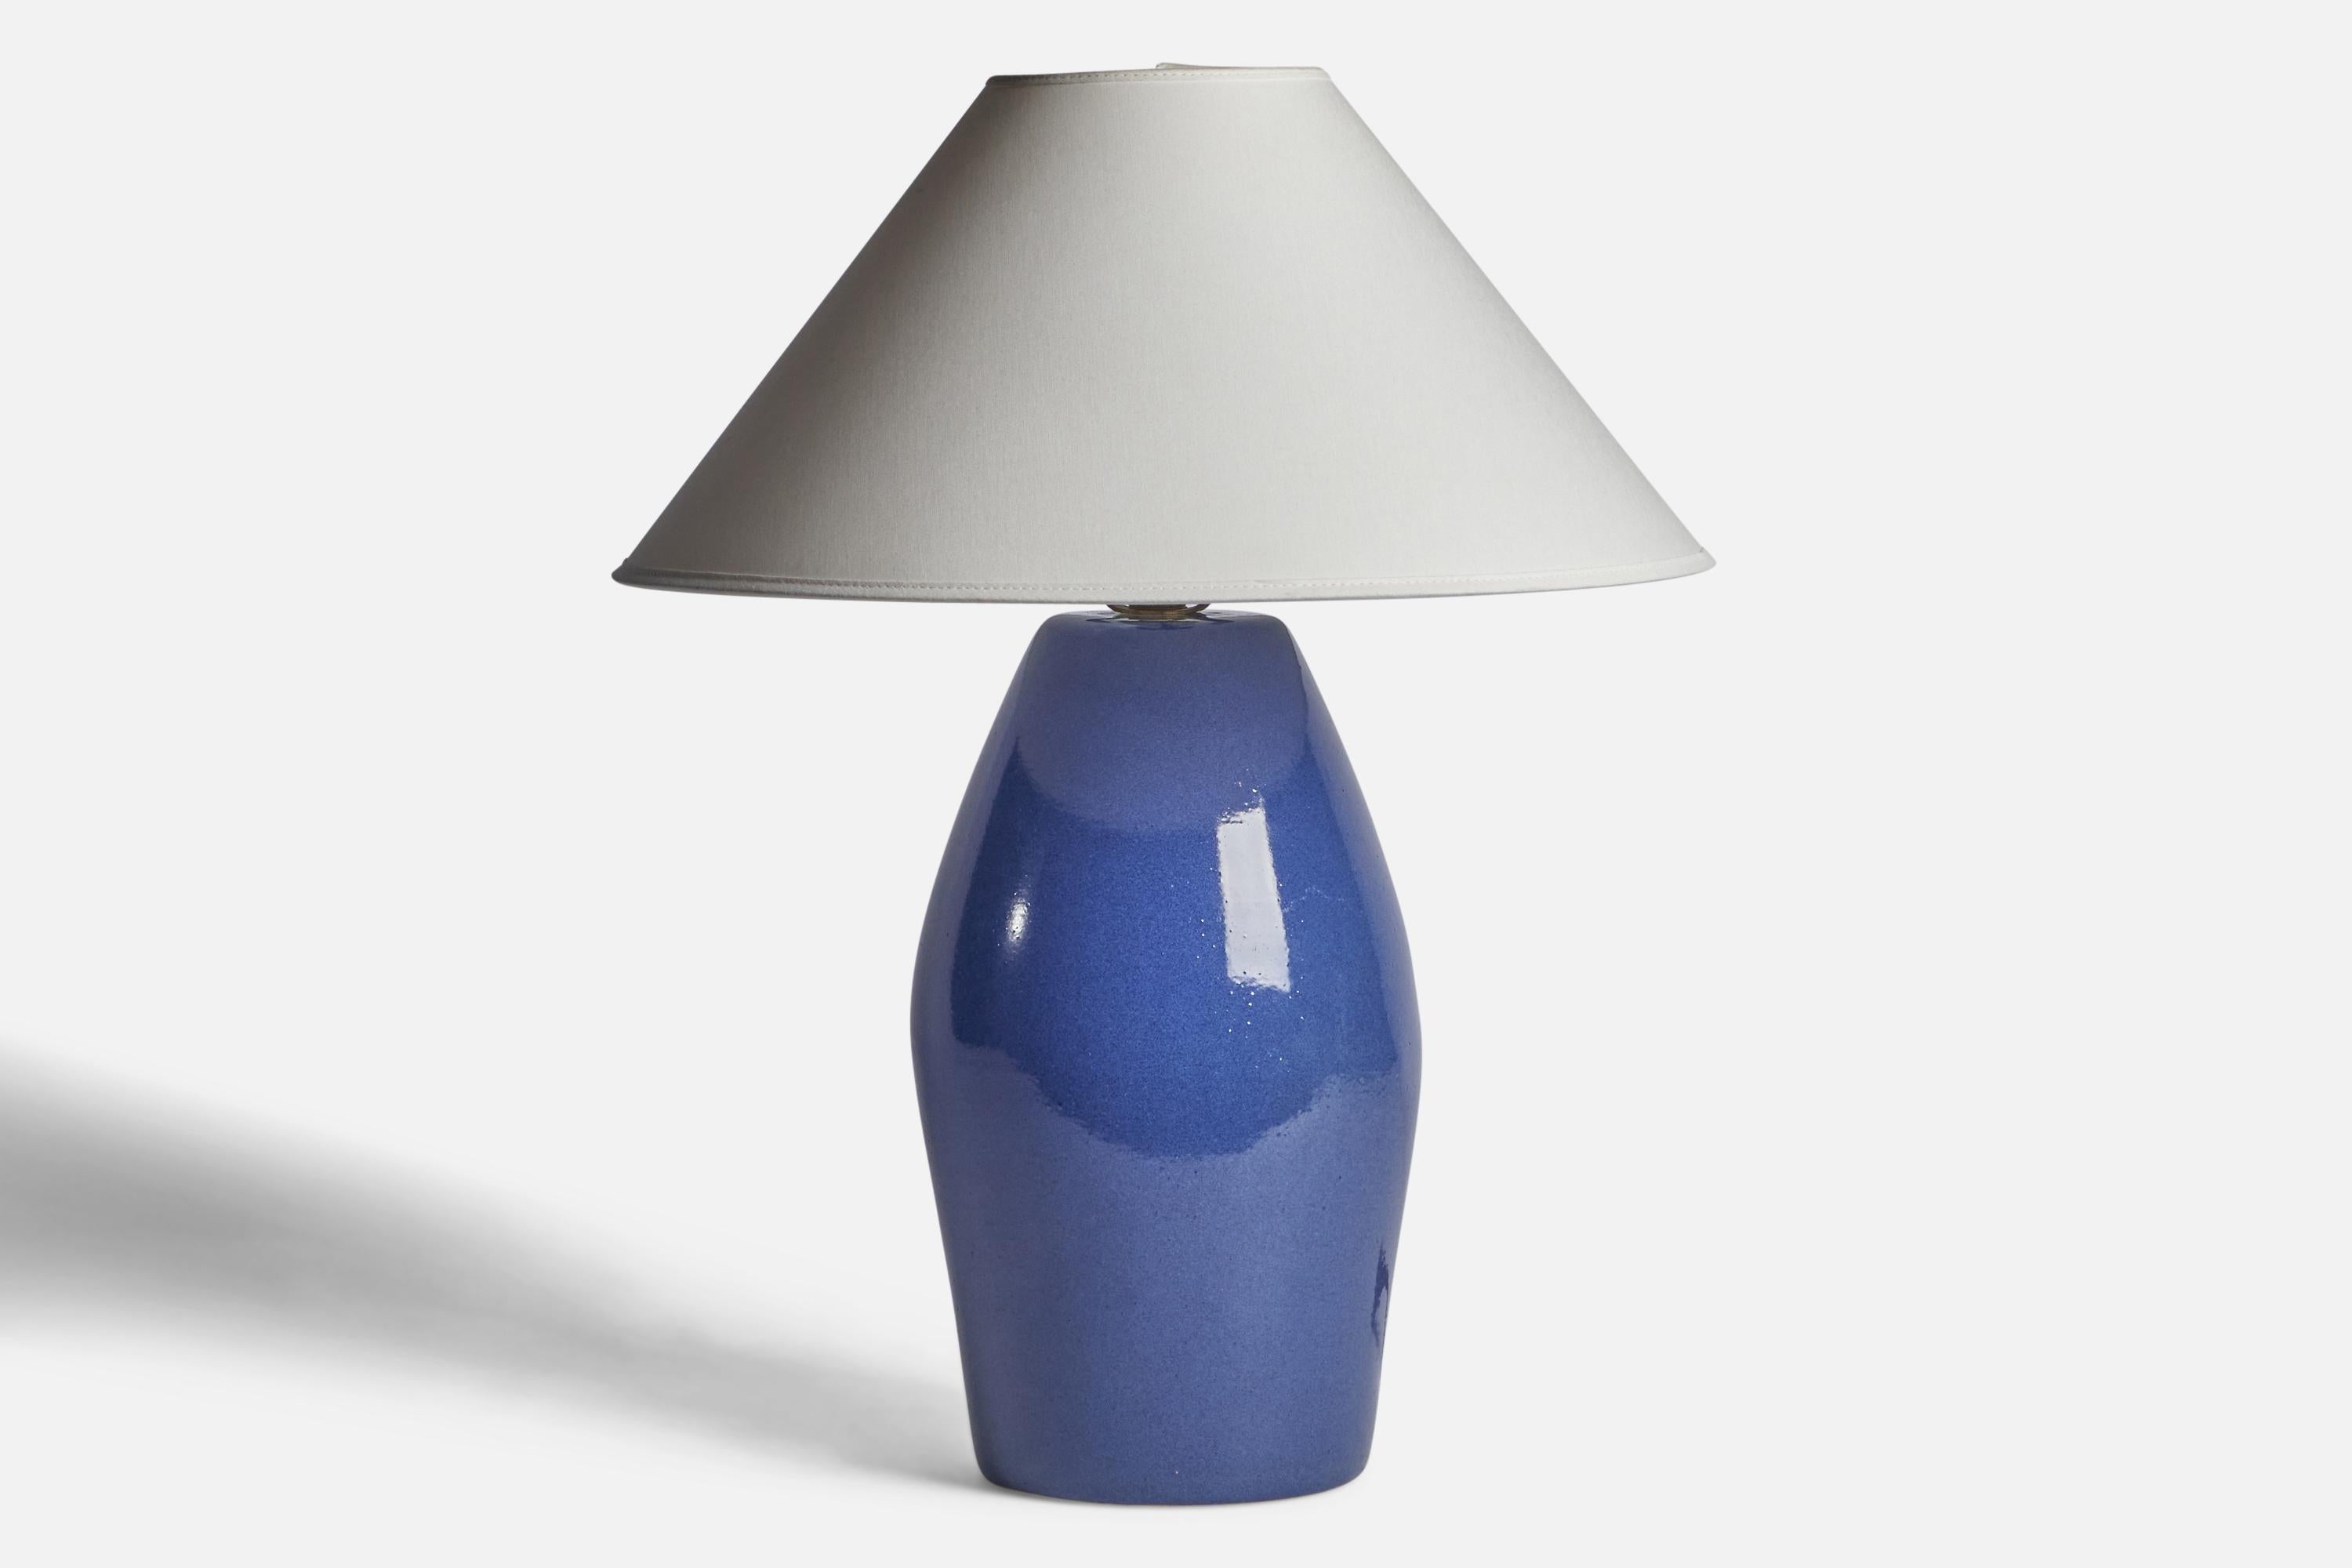 A blue-glazed ceramic table lamp designed by Jane & Gordon Martz and produced by Marshall Studios, USA, 1960s.

Dimensions of Lamp (inches): 15.5” H x 7.15” Diameter
Dimensions of Shade (inches): 4.5” Top Diameter x 16” Bottom Diameter x 7.15” H